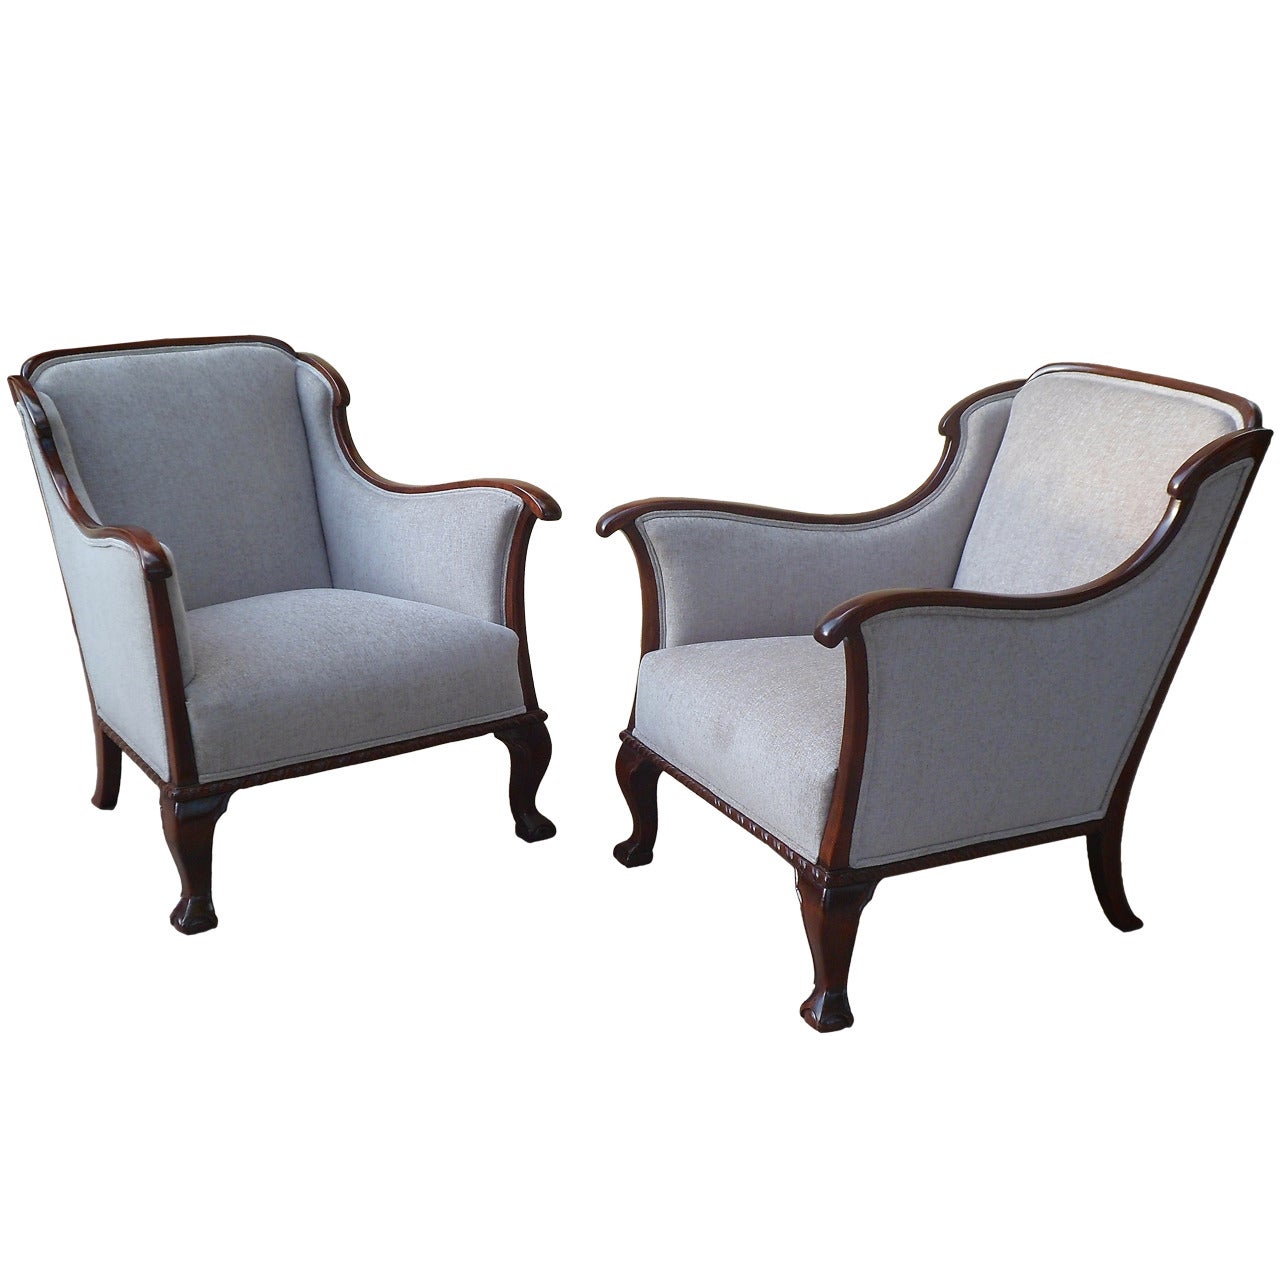 Pair of Swedish Art Nouveau Armchairs in Taupe Velvet, circa 1910